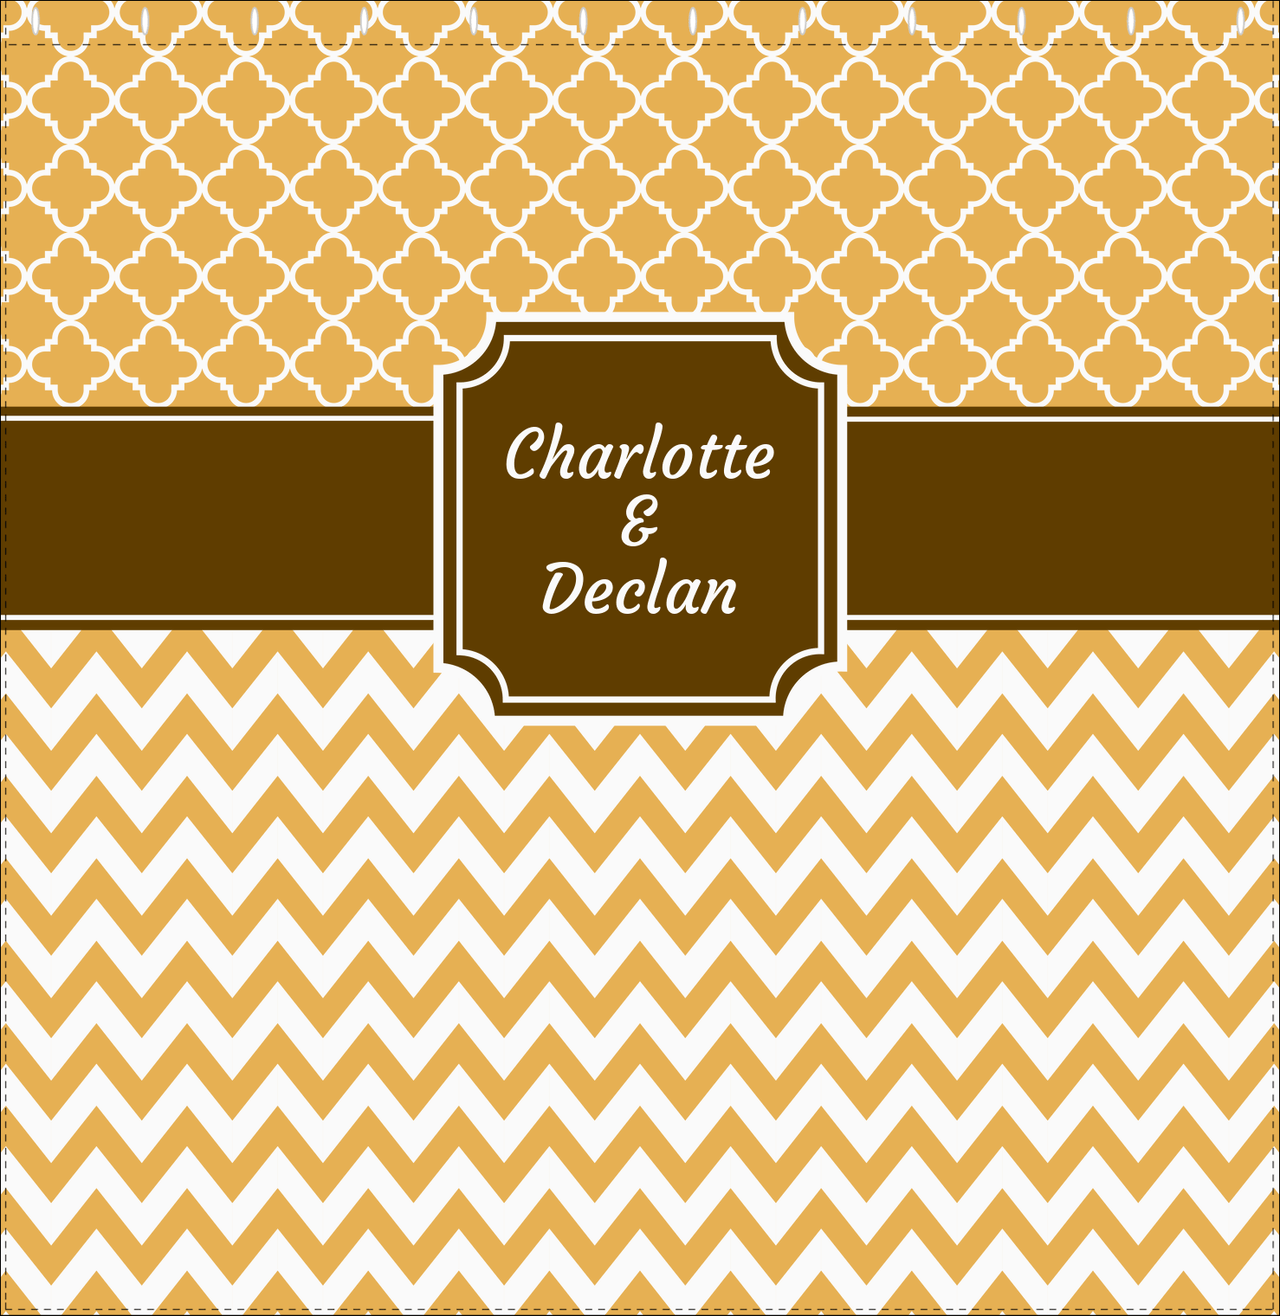 Personalized Quatrefoil and Chevron III Shower Curtain - Gold and Brown - Stamp Nameplate - Decorate View